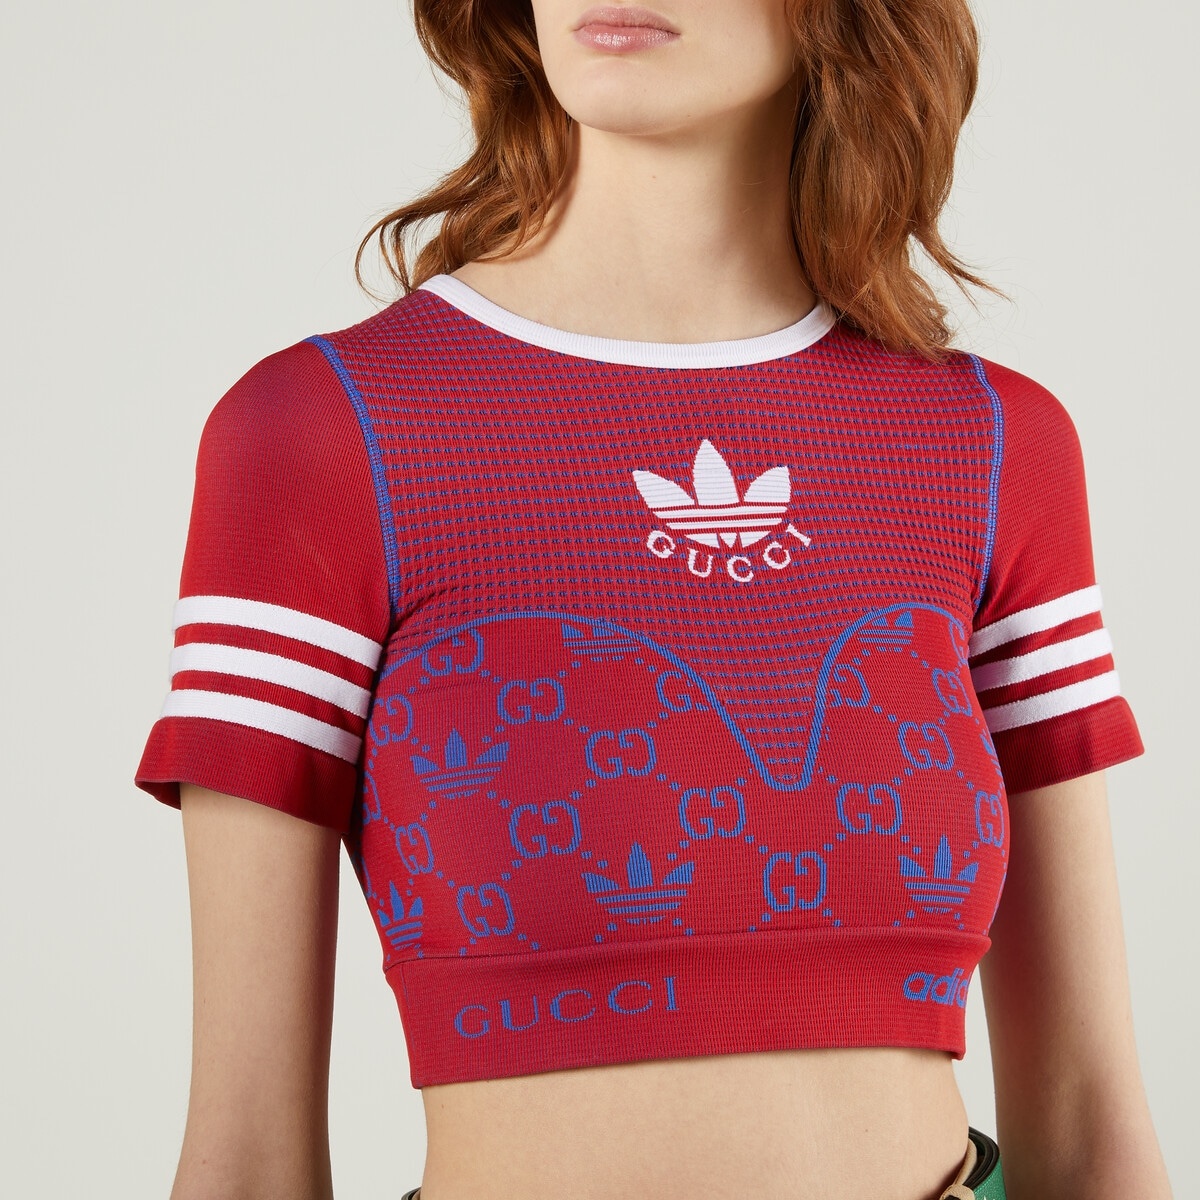 adidas x Gucci jersey cropped top - 3